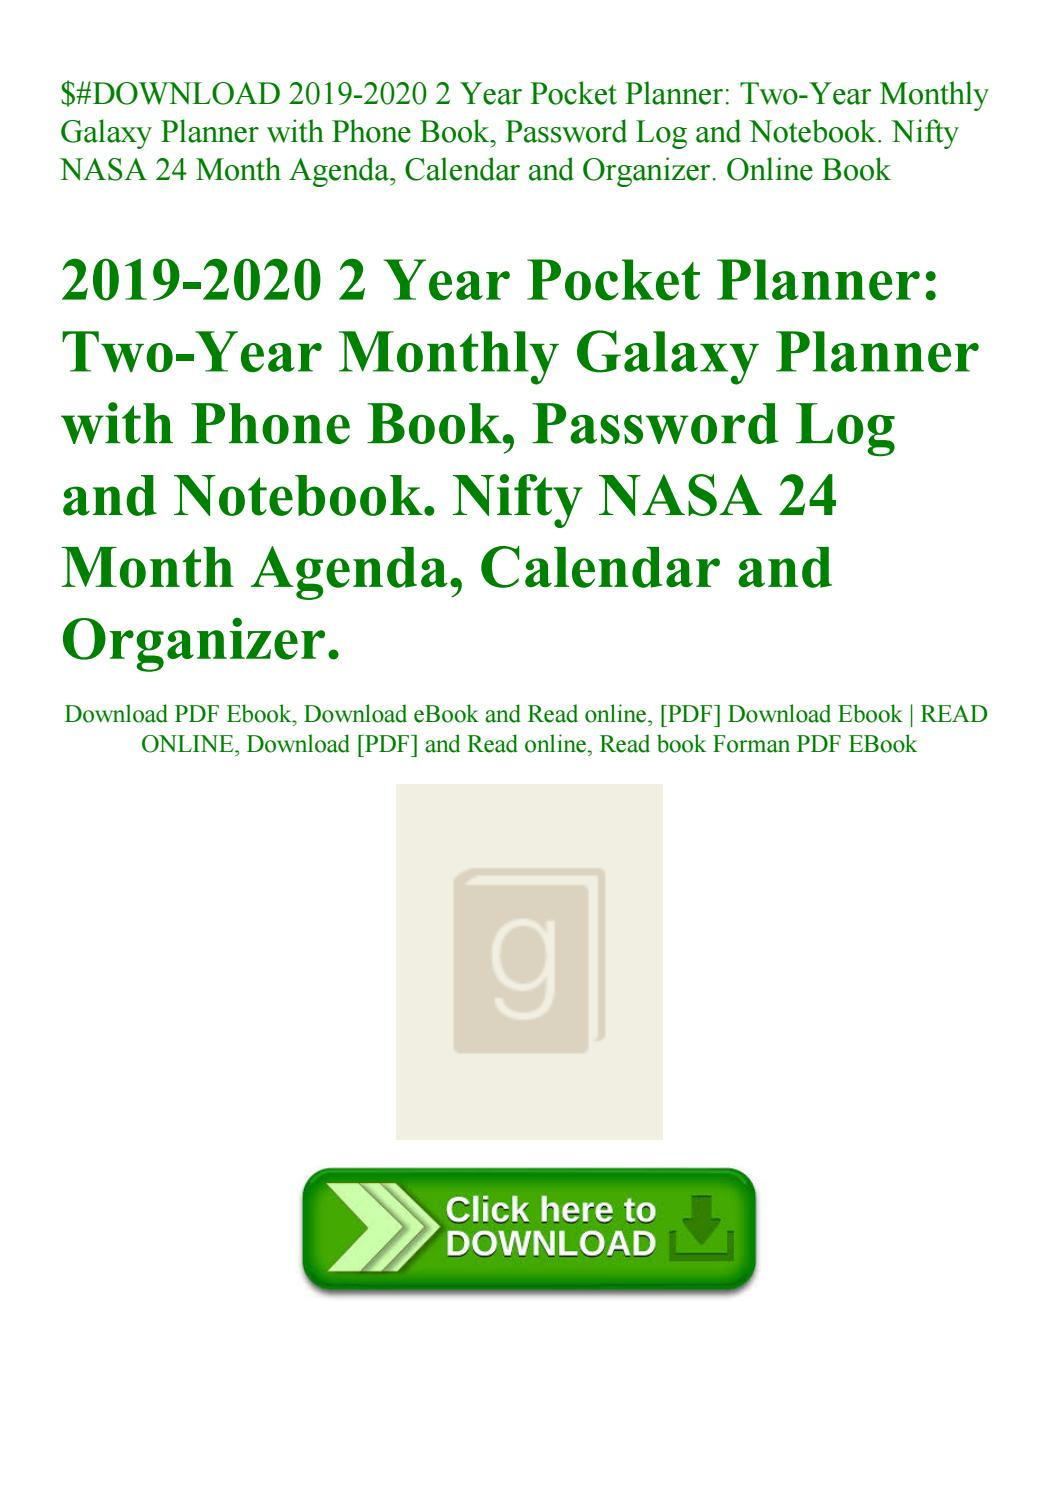 Download 2019-2020 2 Year Pocket Planner Two-Year Monthly